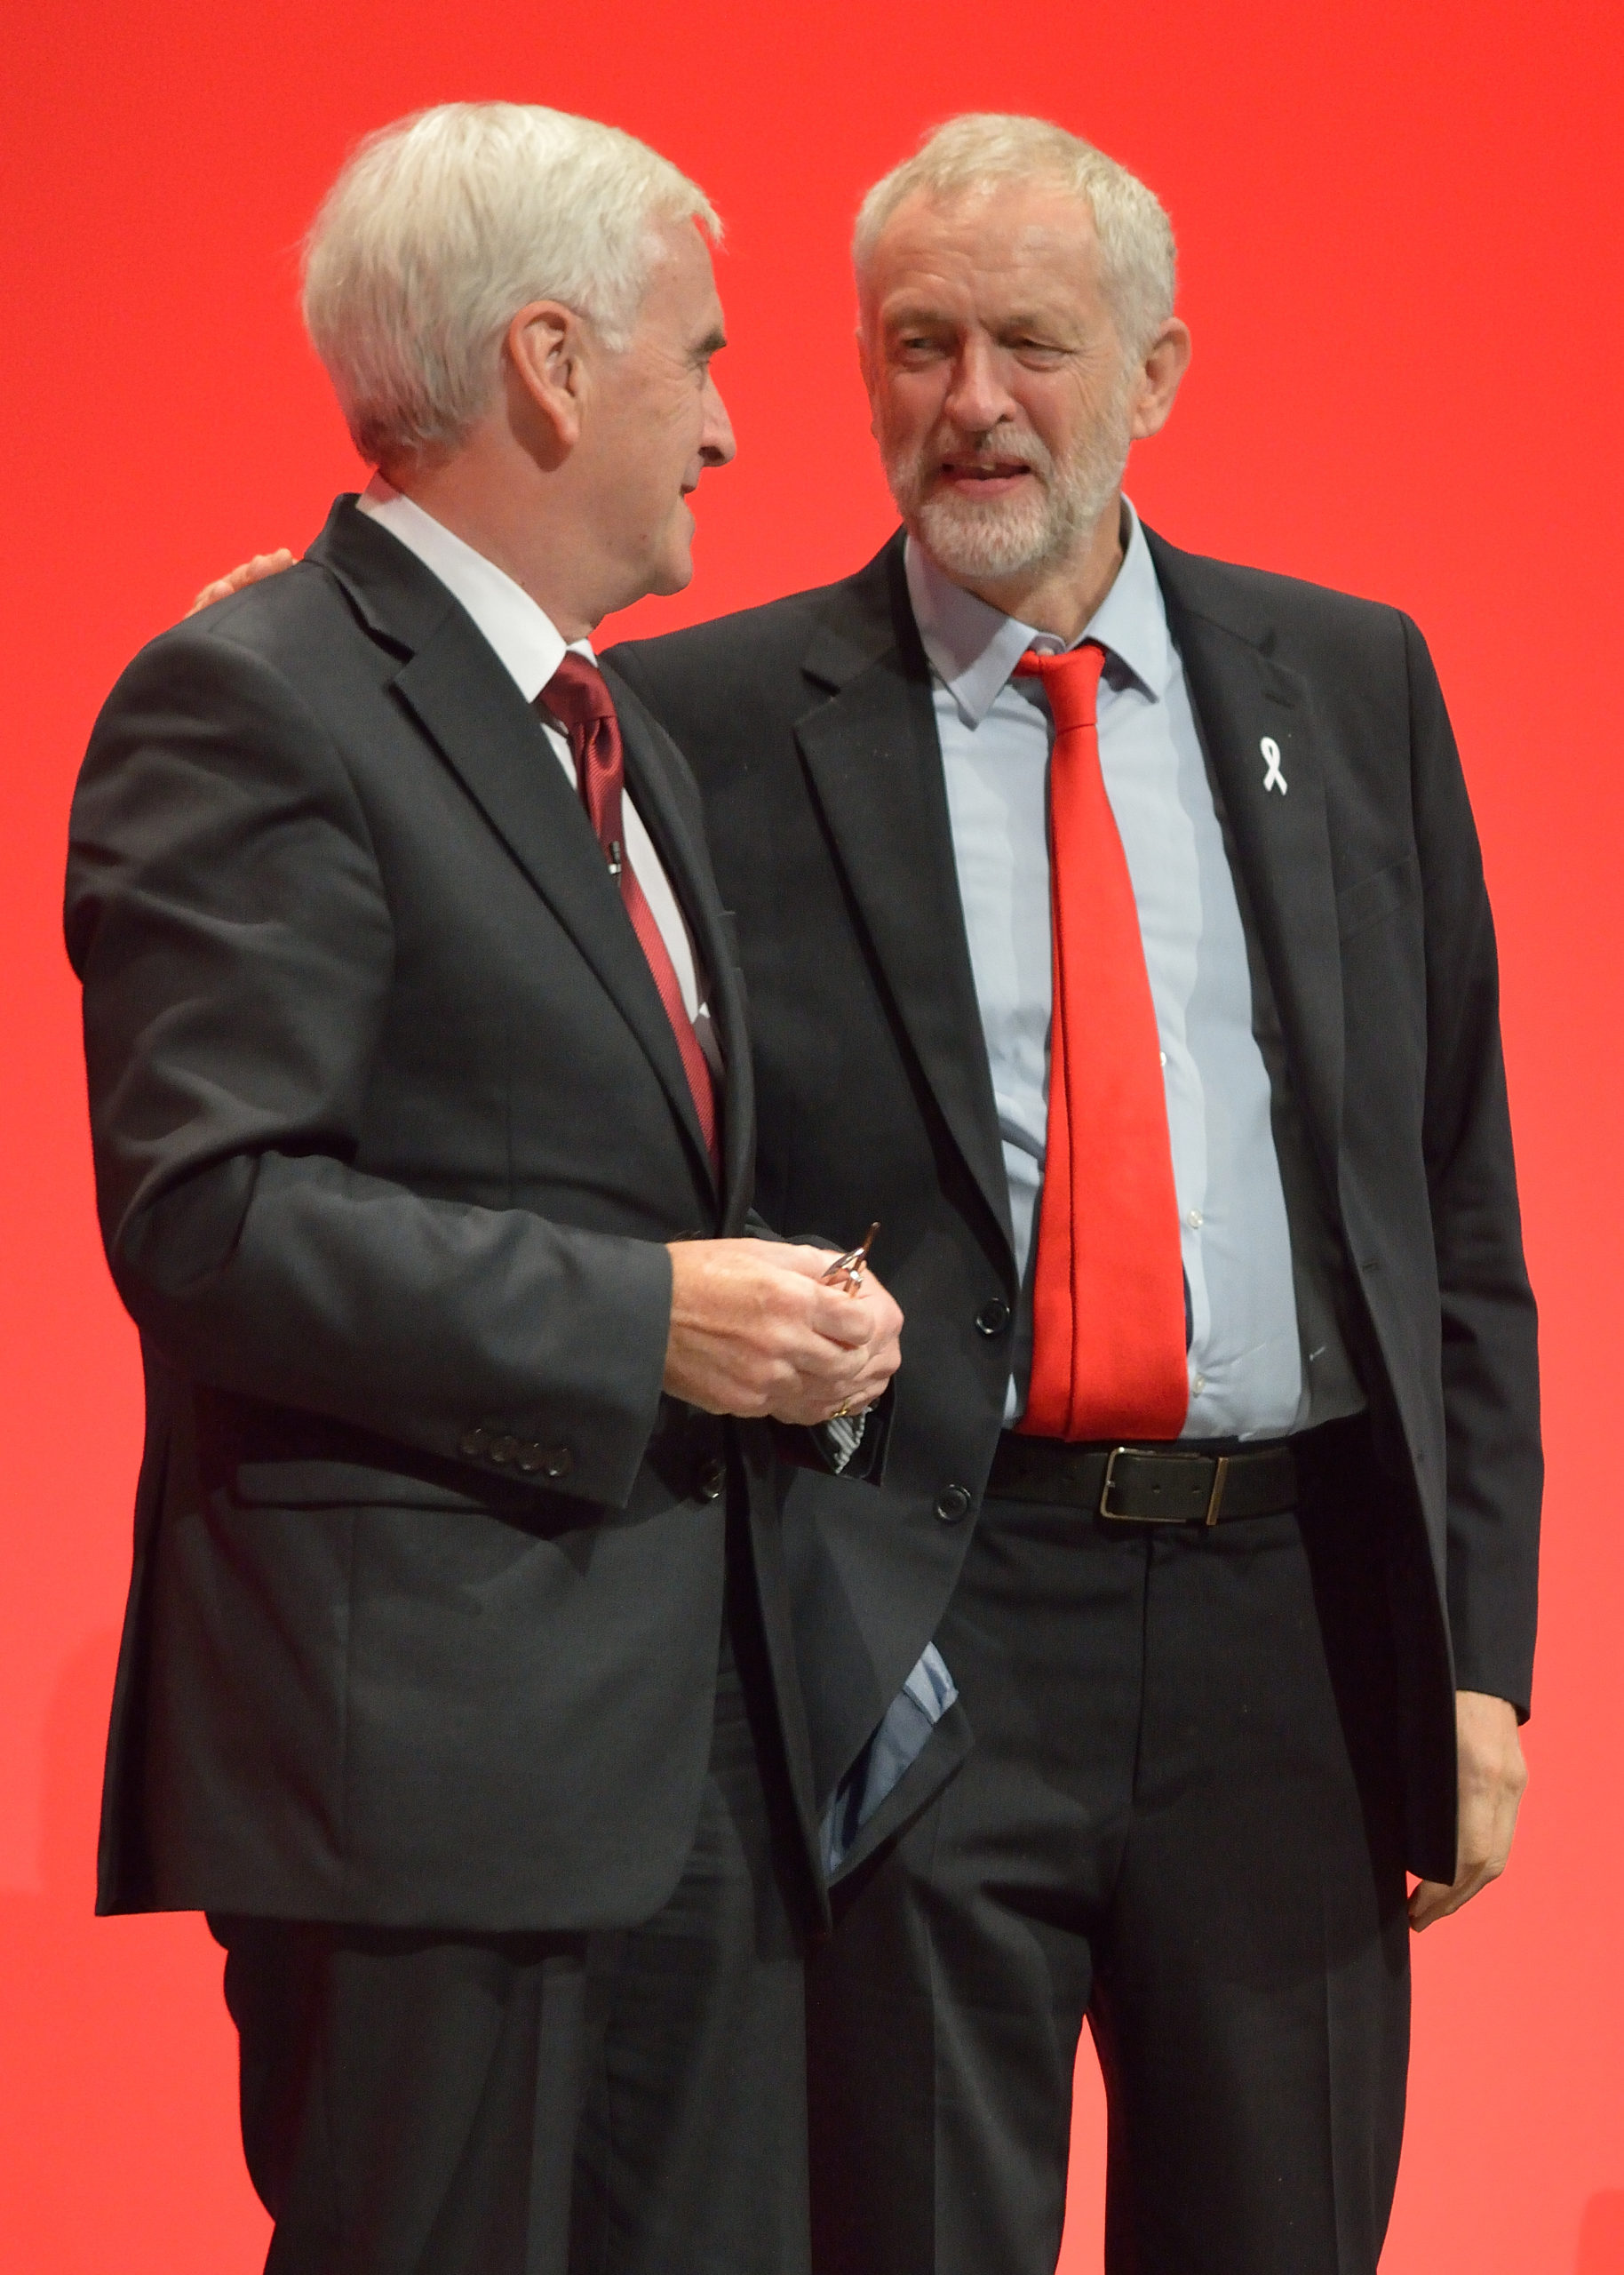 Labour Leadership Race – The Road to Power